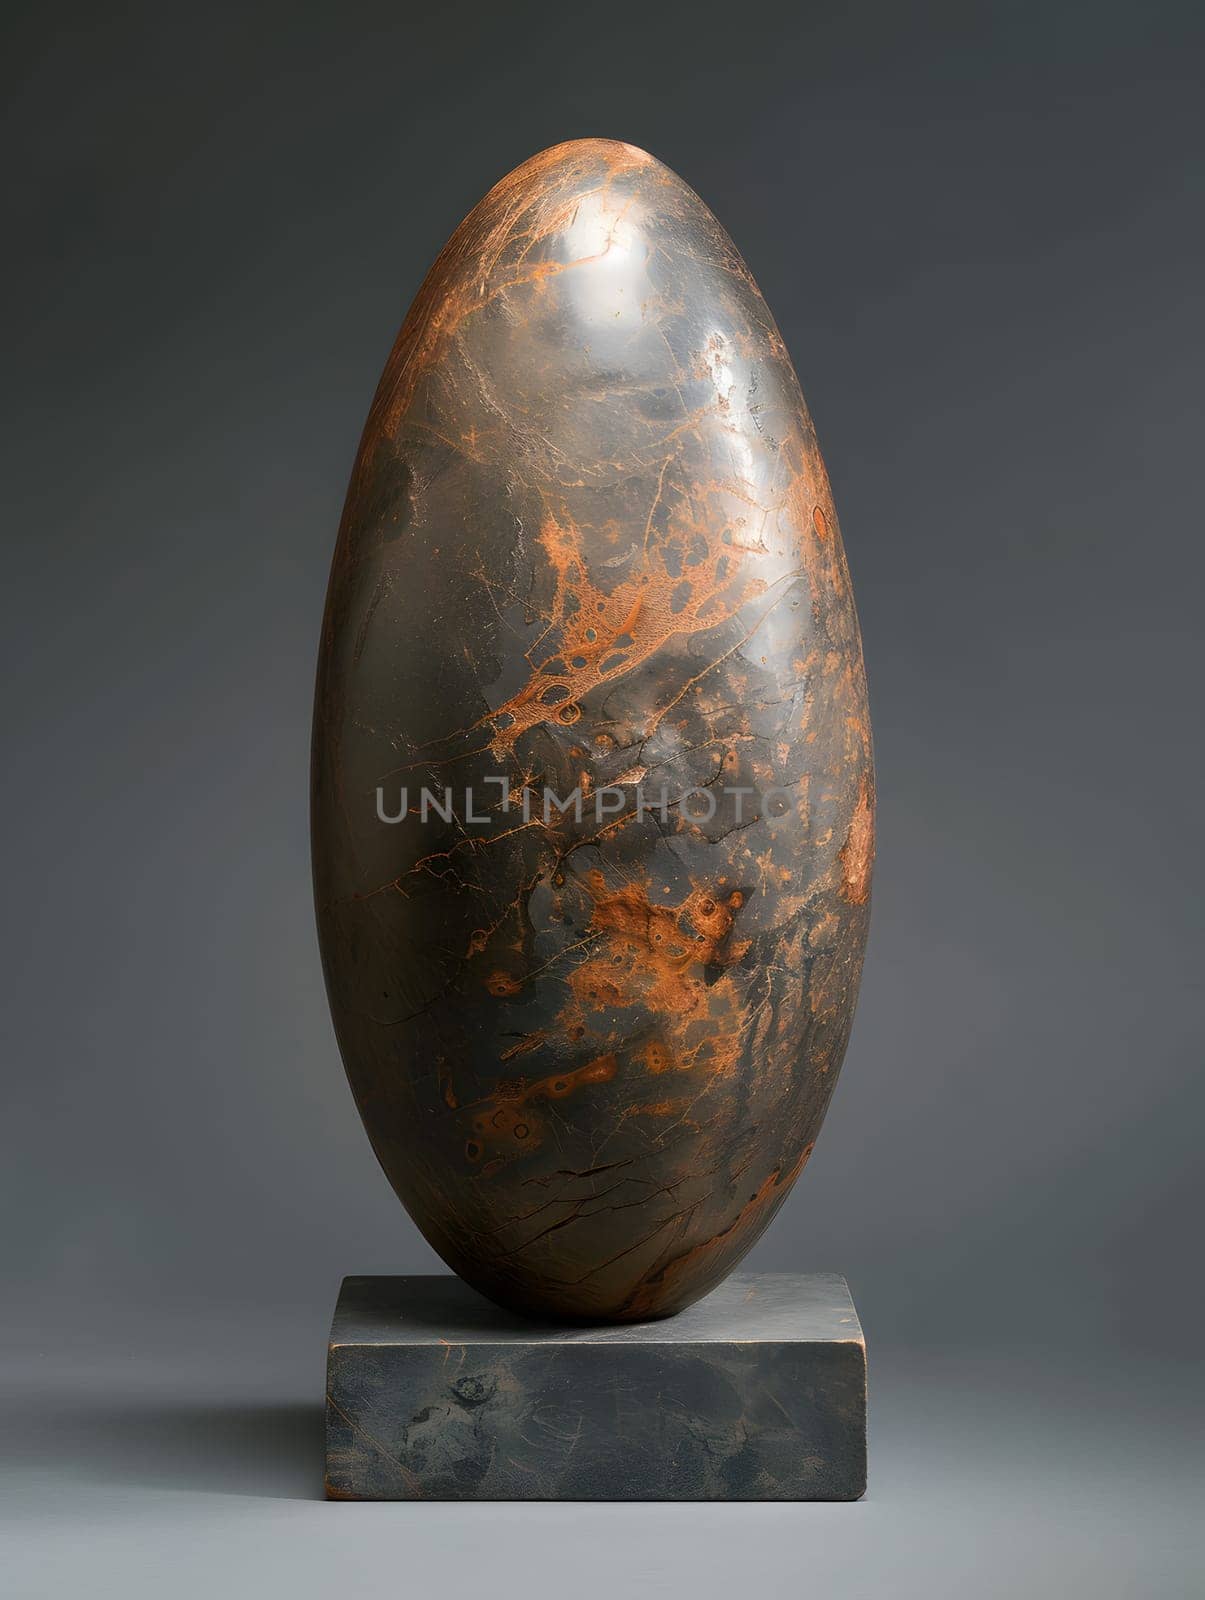 An ancient artifact, a stone egg, rests on a textured gray surface in a still life photography setup. The circle shape contrasts with the rough background